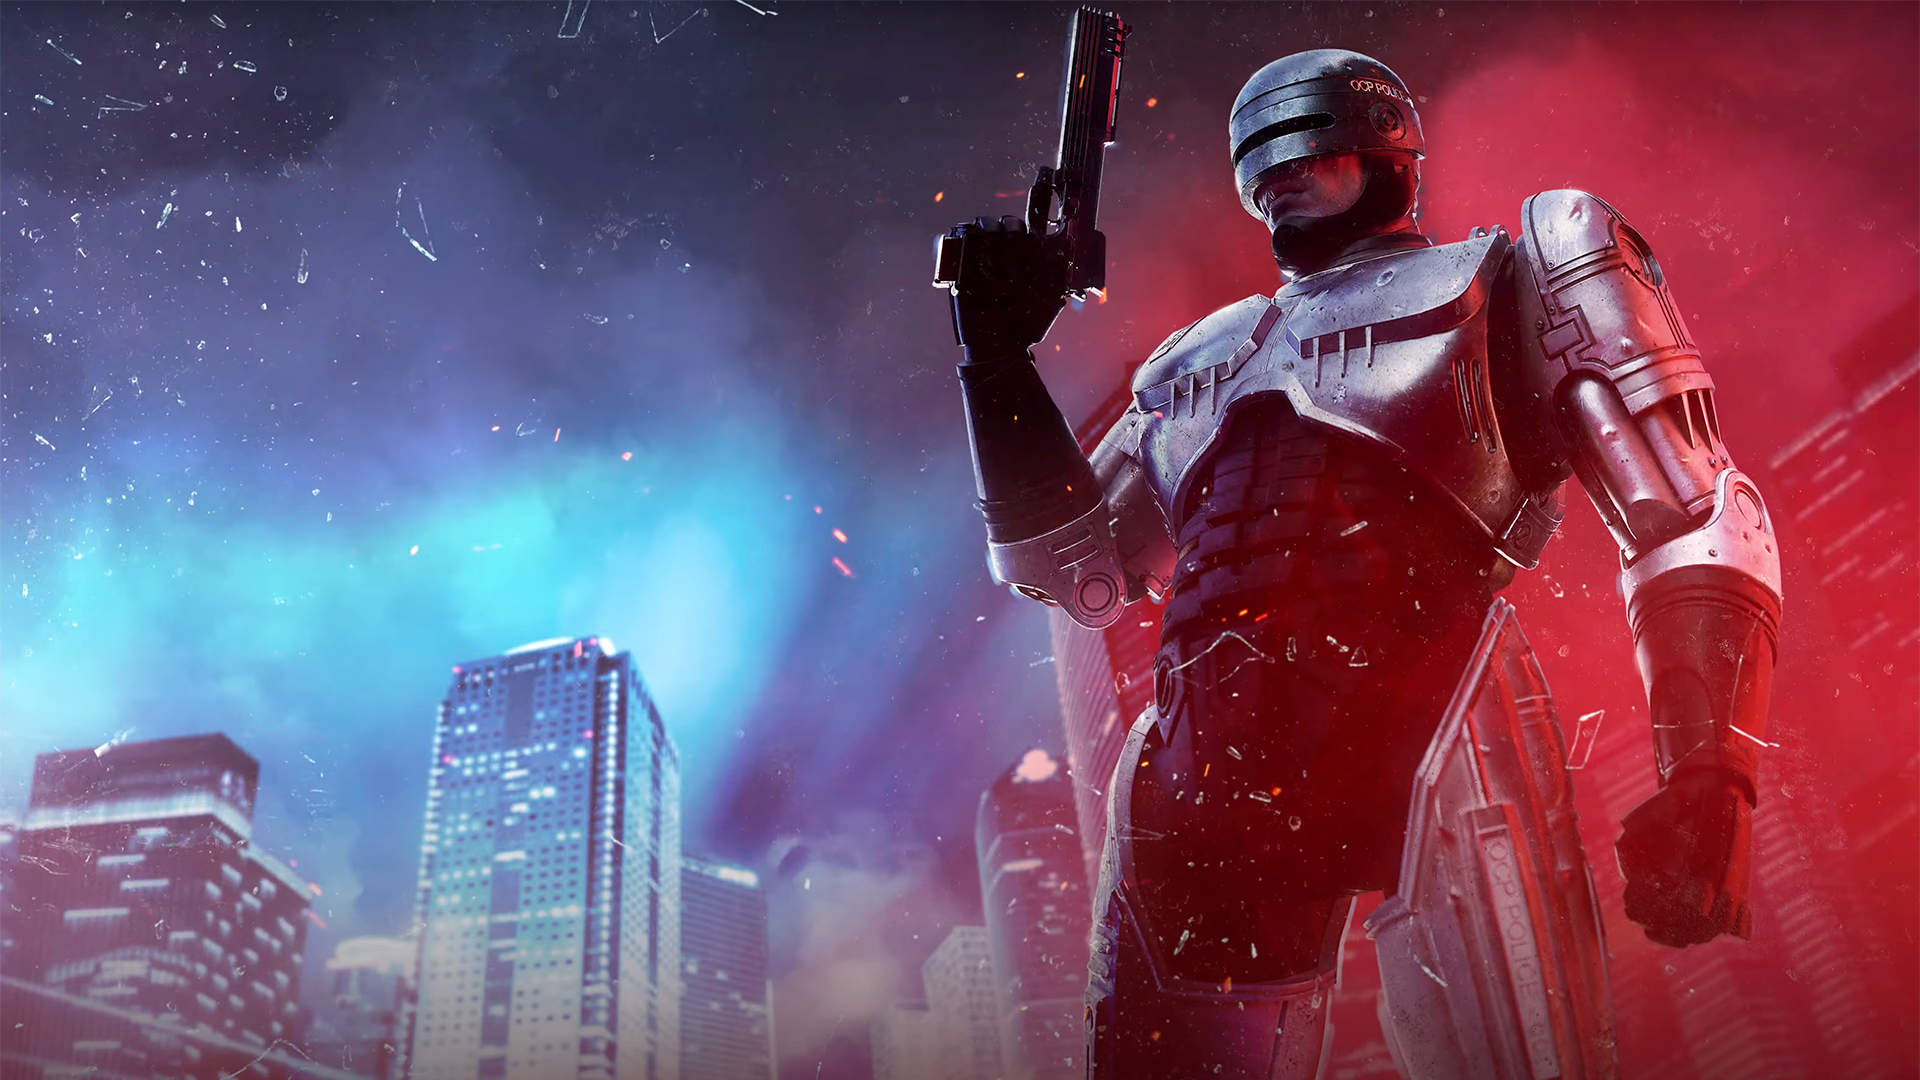 Artwork of RoboCop with Detroit in the background from RoboCop: Rogue City